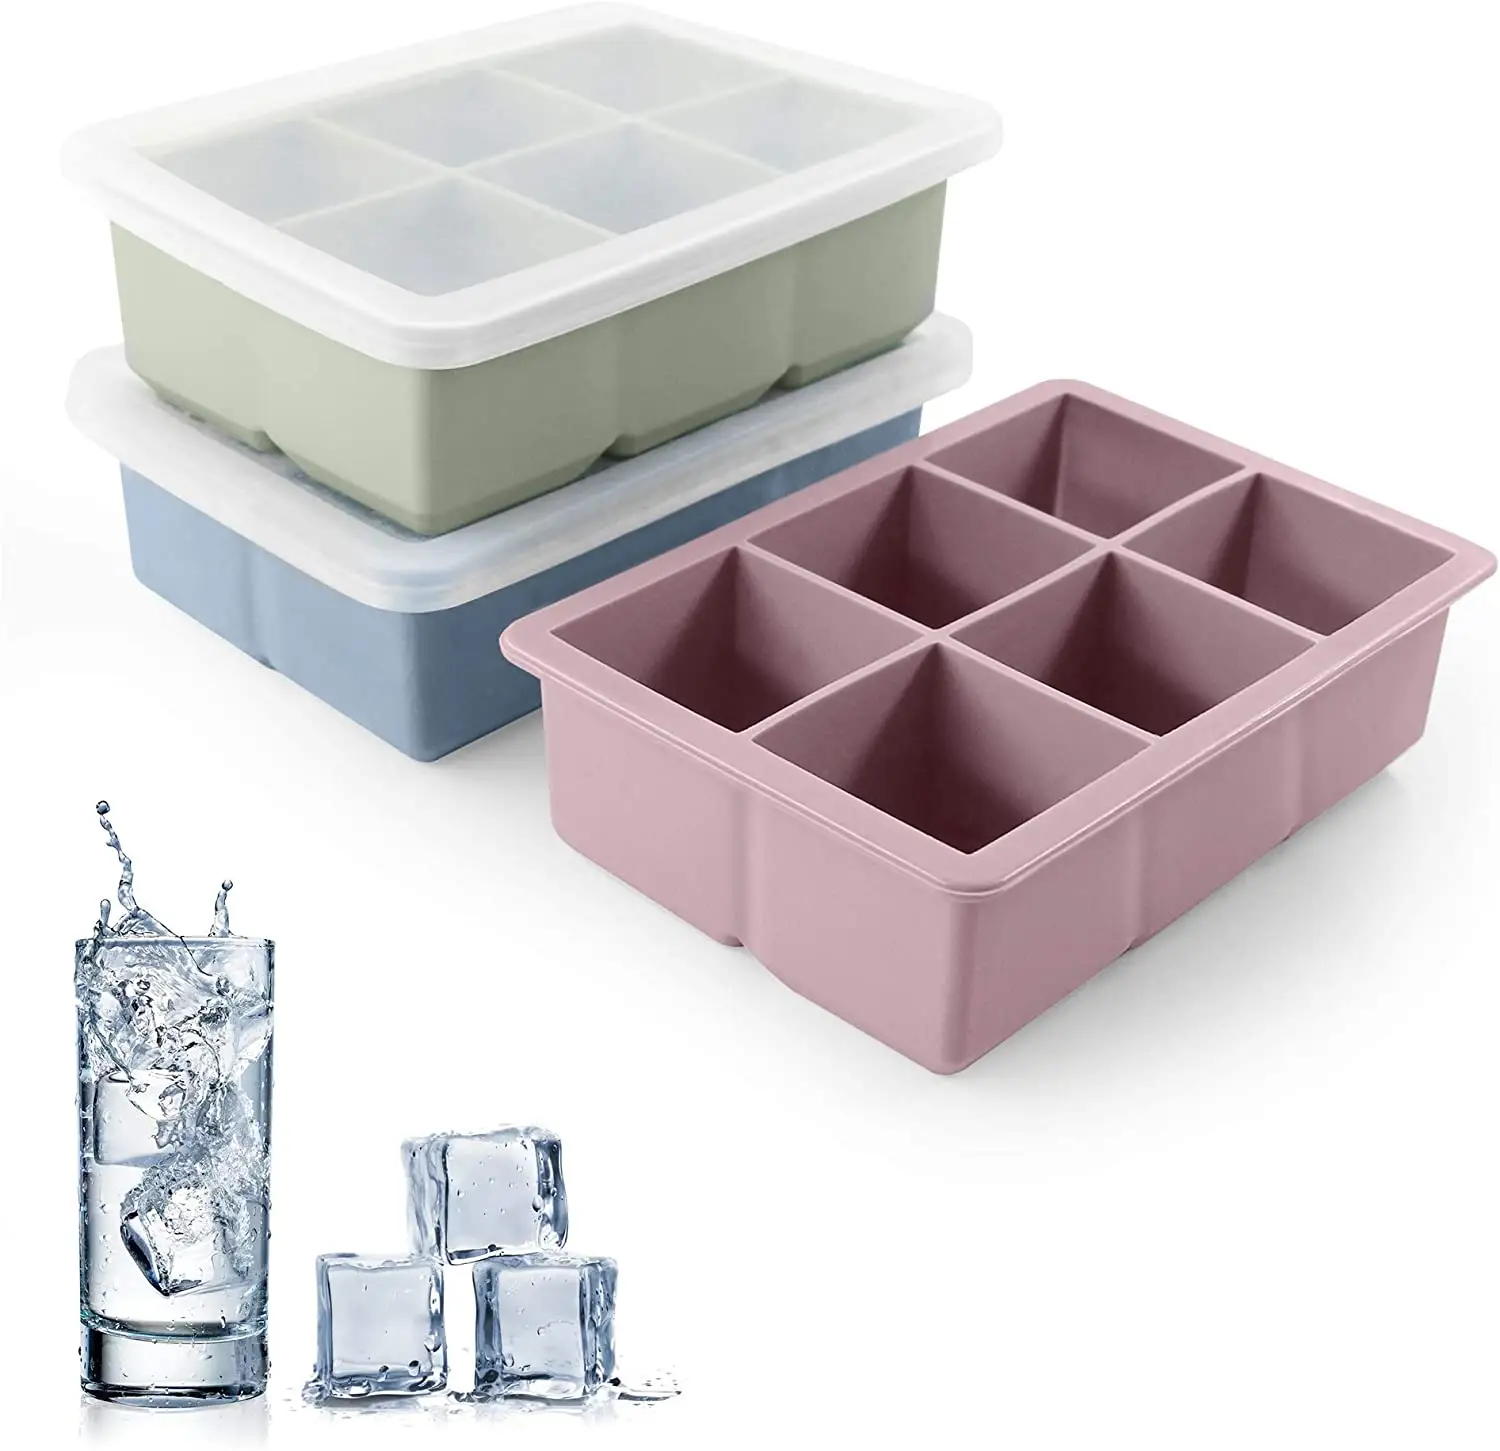 Hot sale silicone 6 cubes ice pop homemade ice cube tray mould large silicone ice square moulds